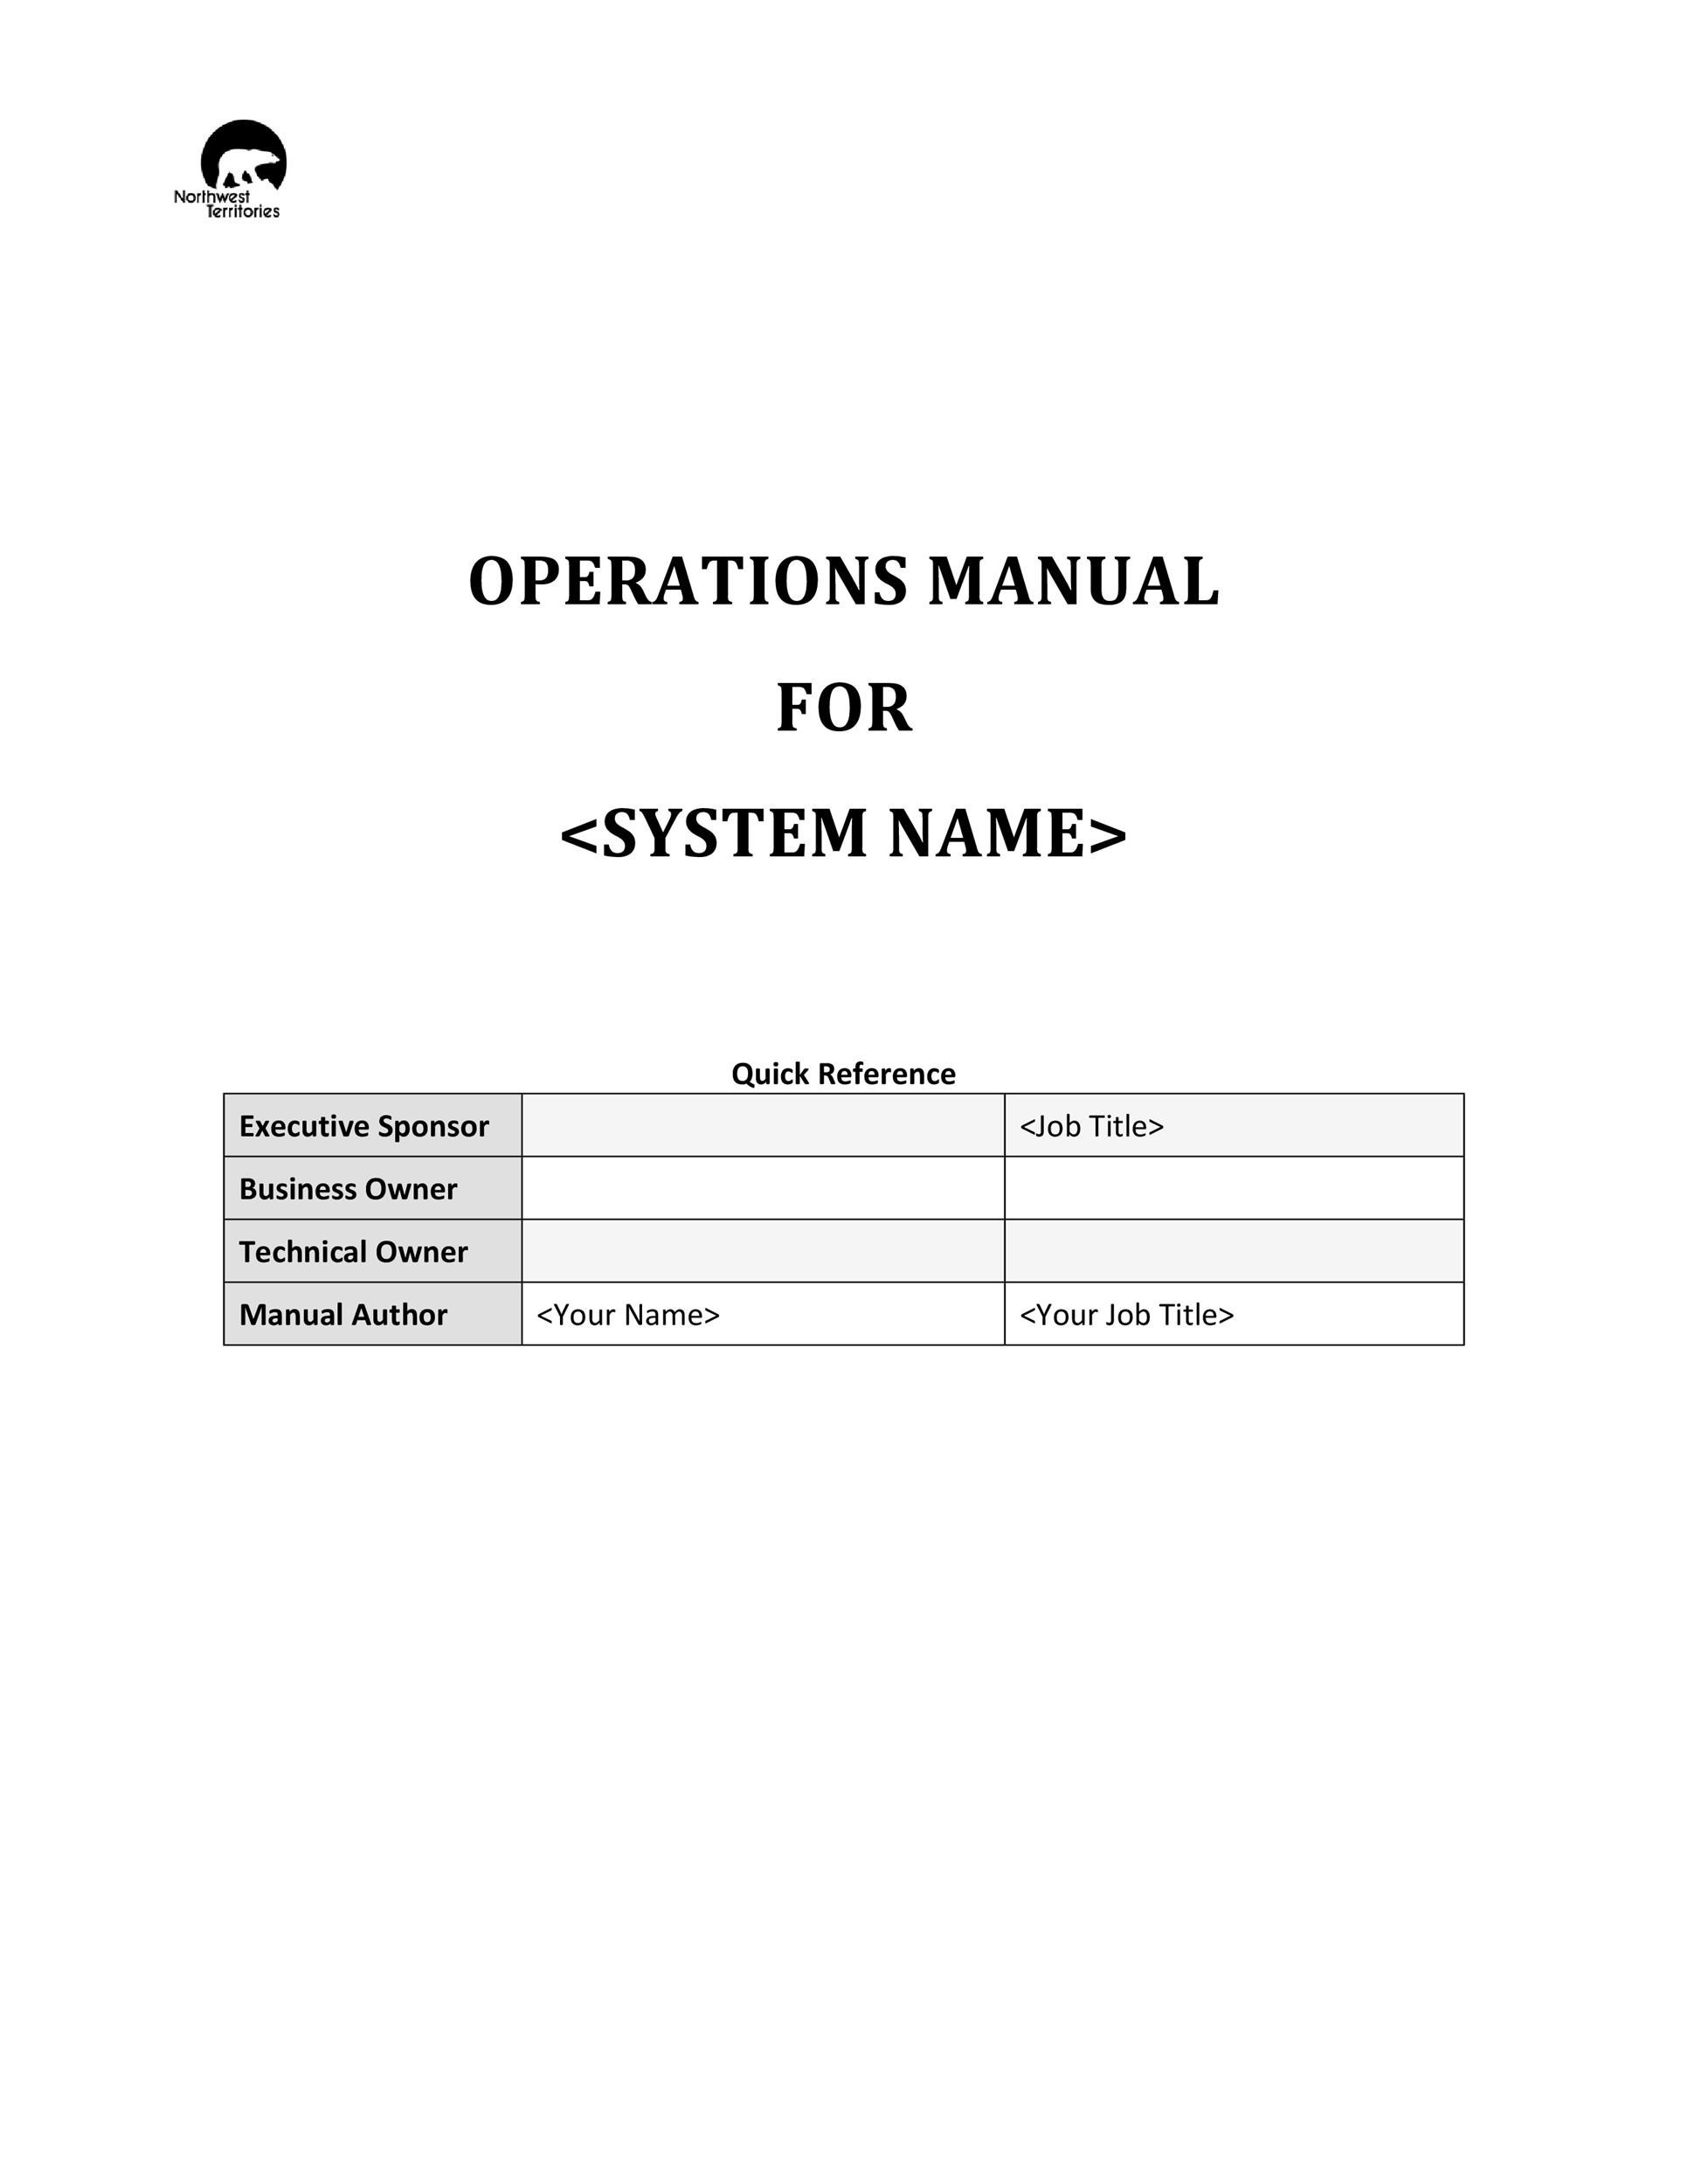 Free instruction manual template 29